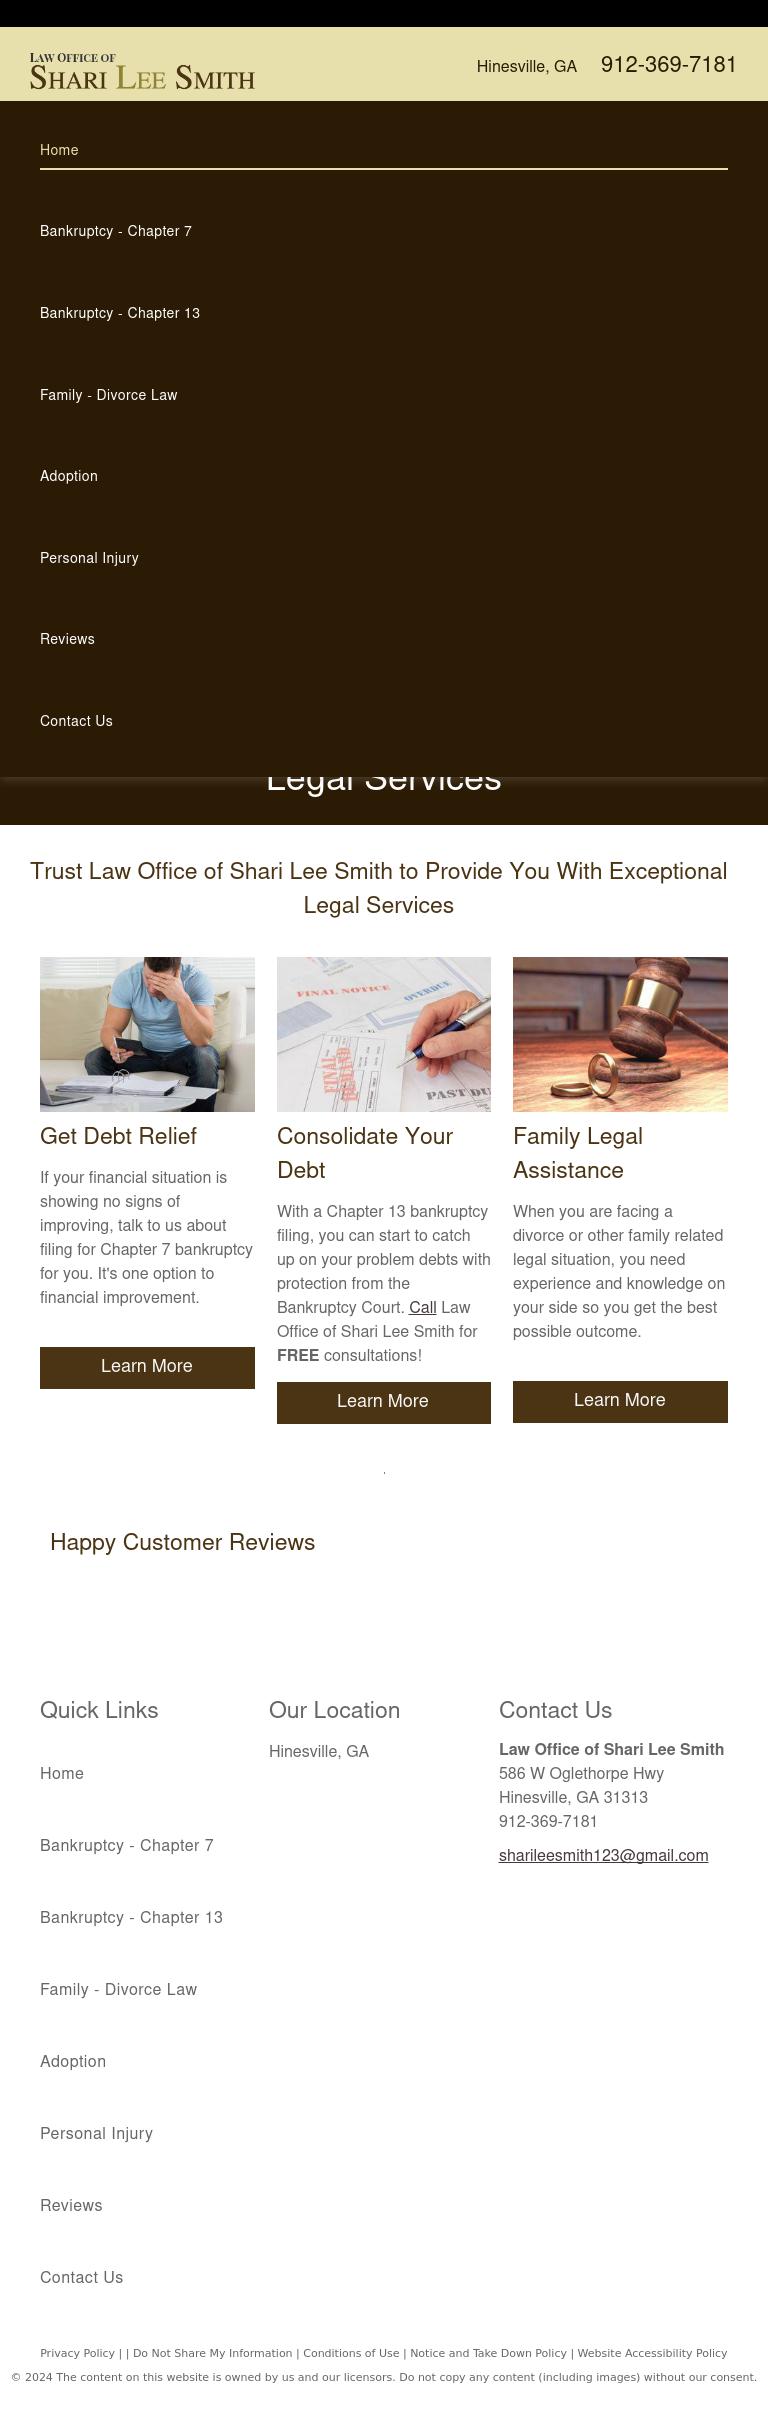 Law Offices of Shari Lee Smith - Hinesville GA Lawyers